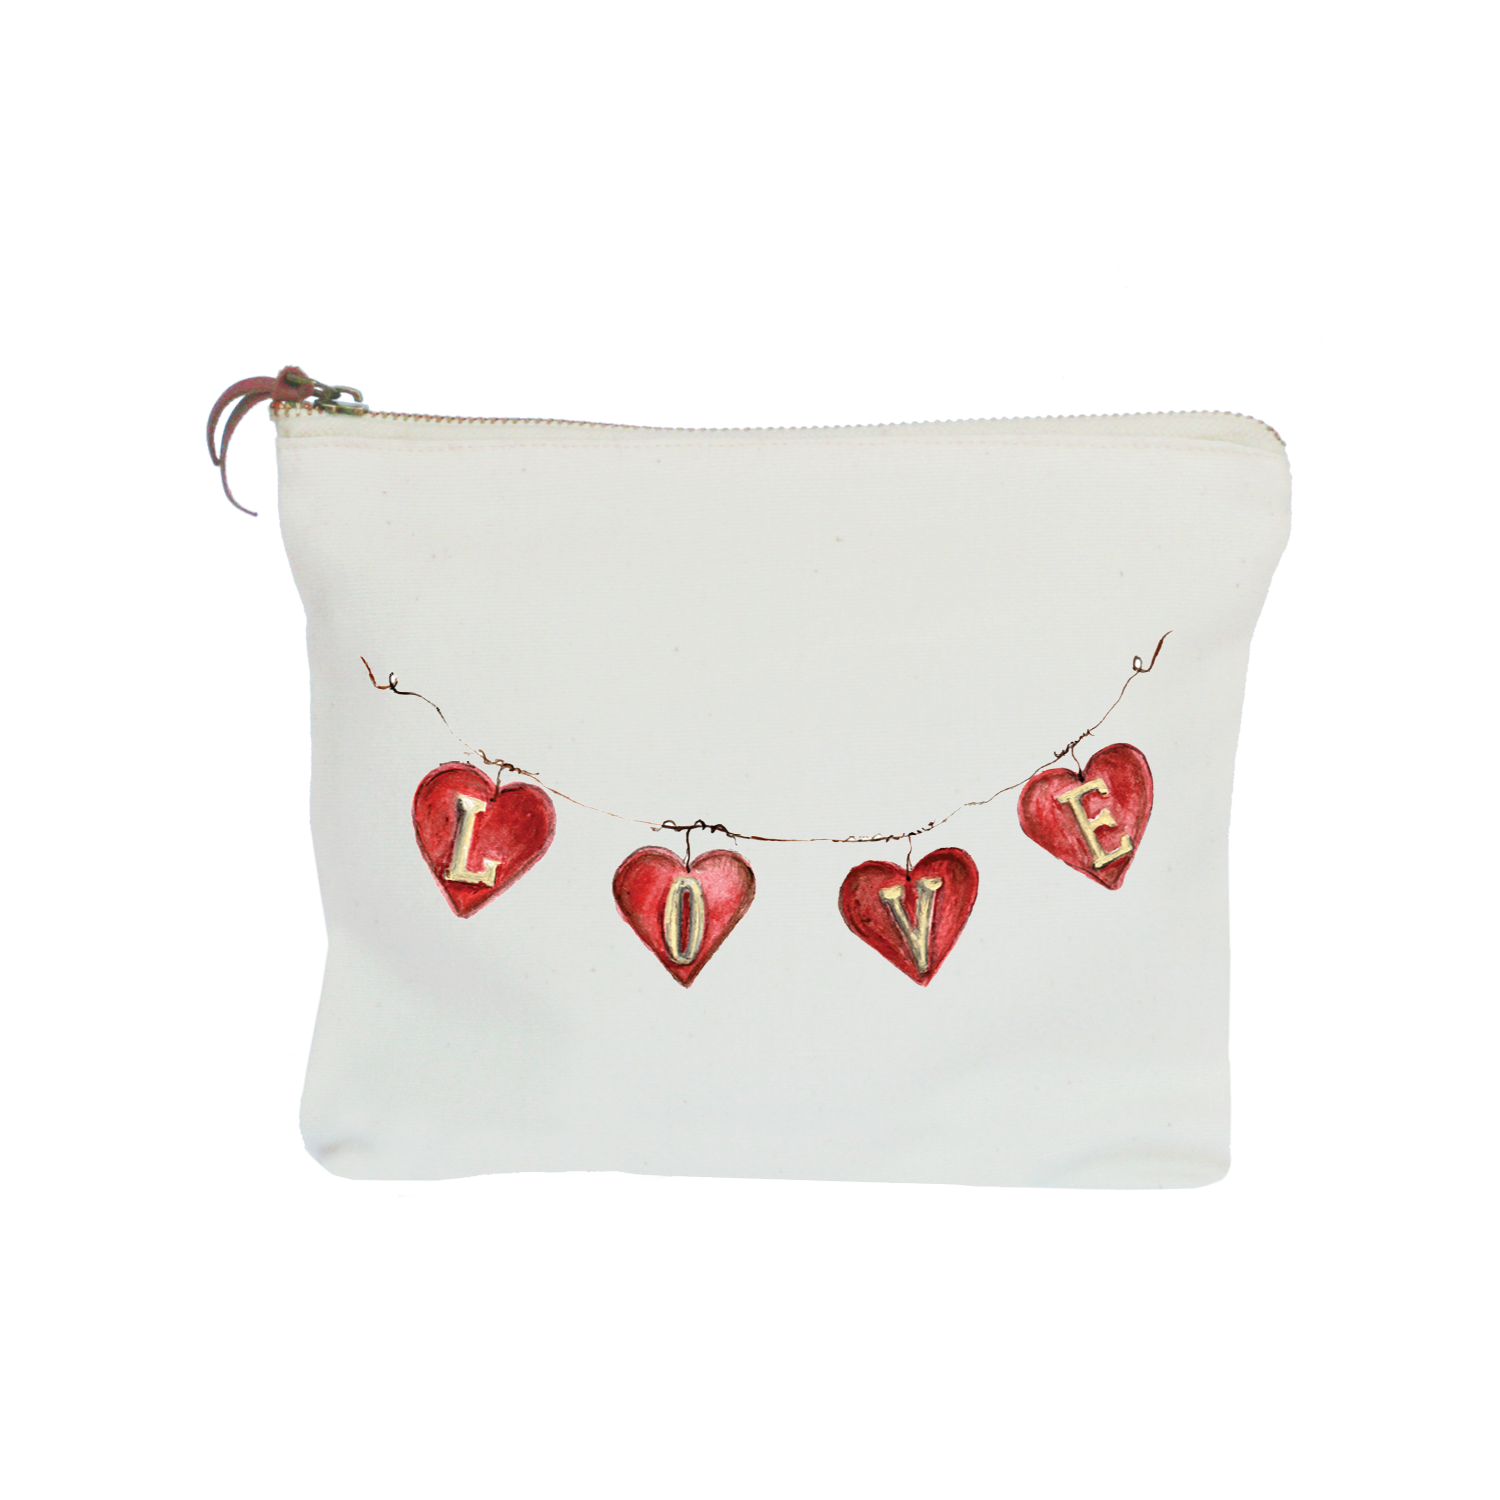 hearts on wire zipper pouch